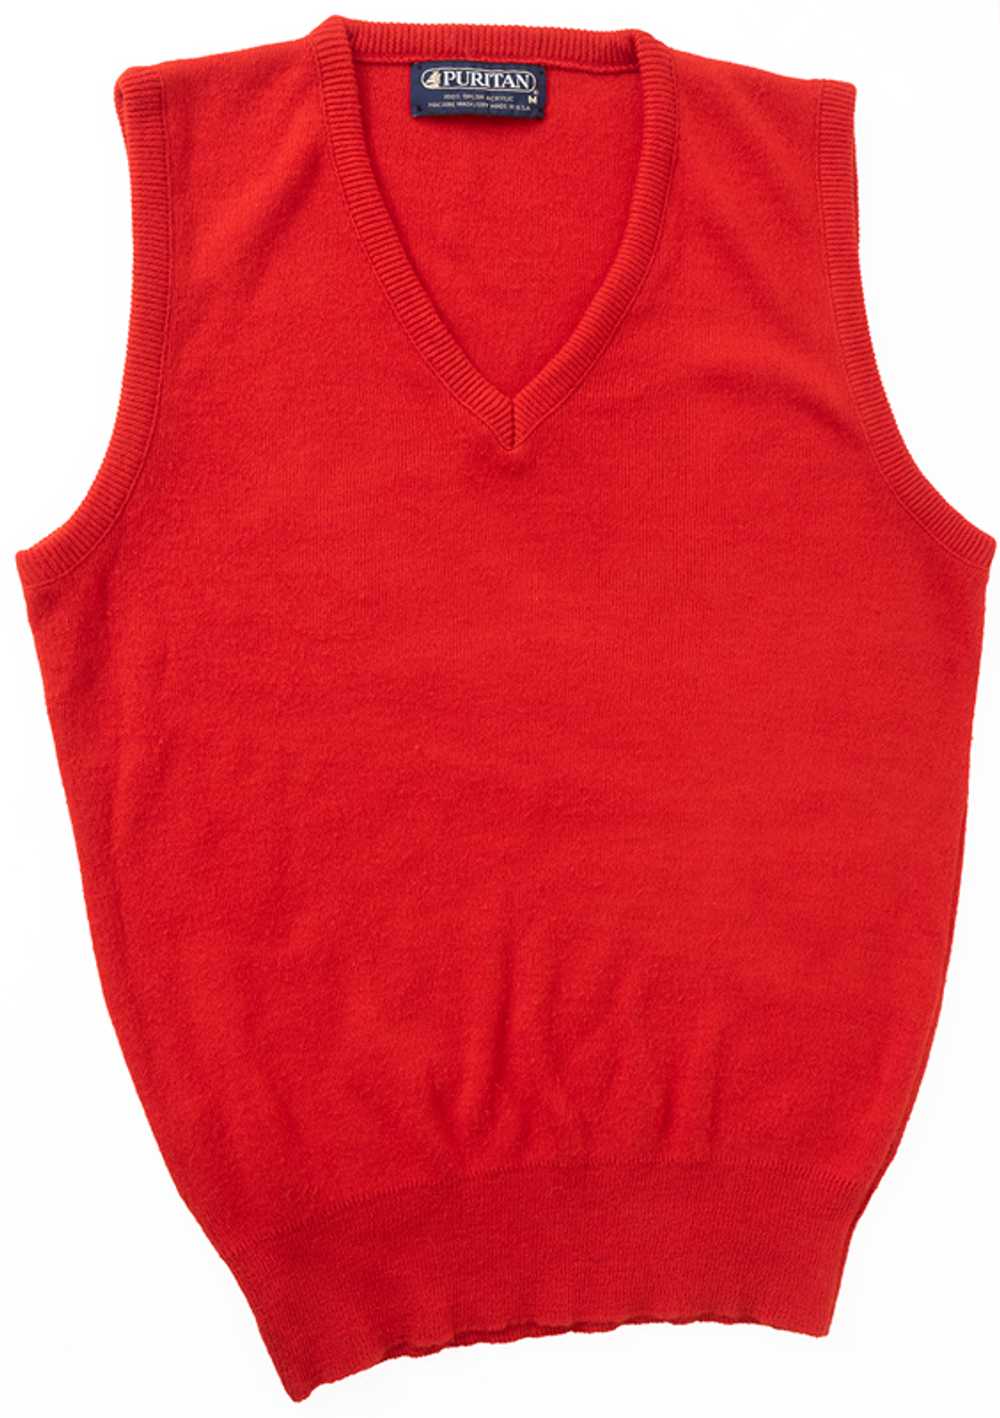 1970s Red Sweater Vest - image 1